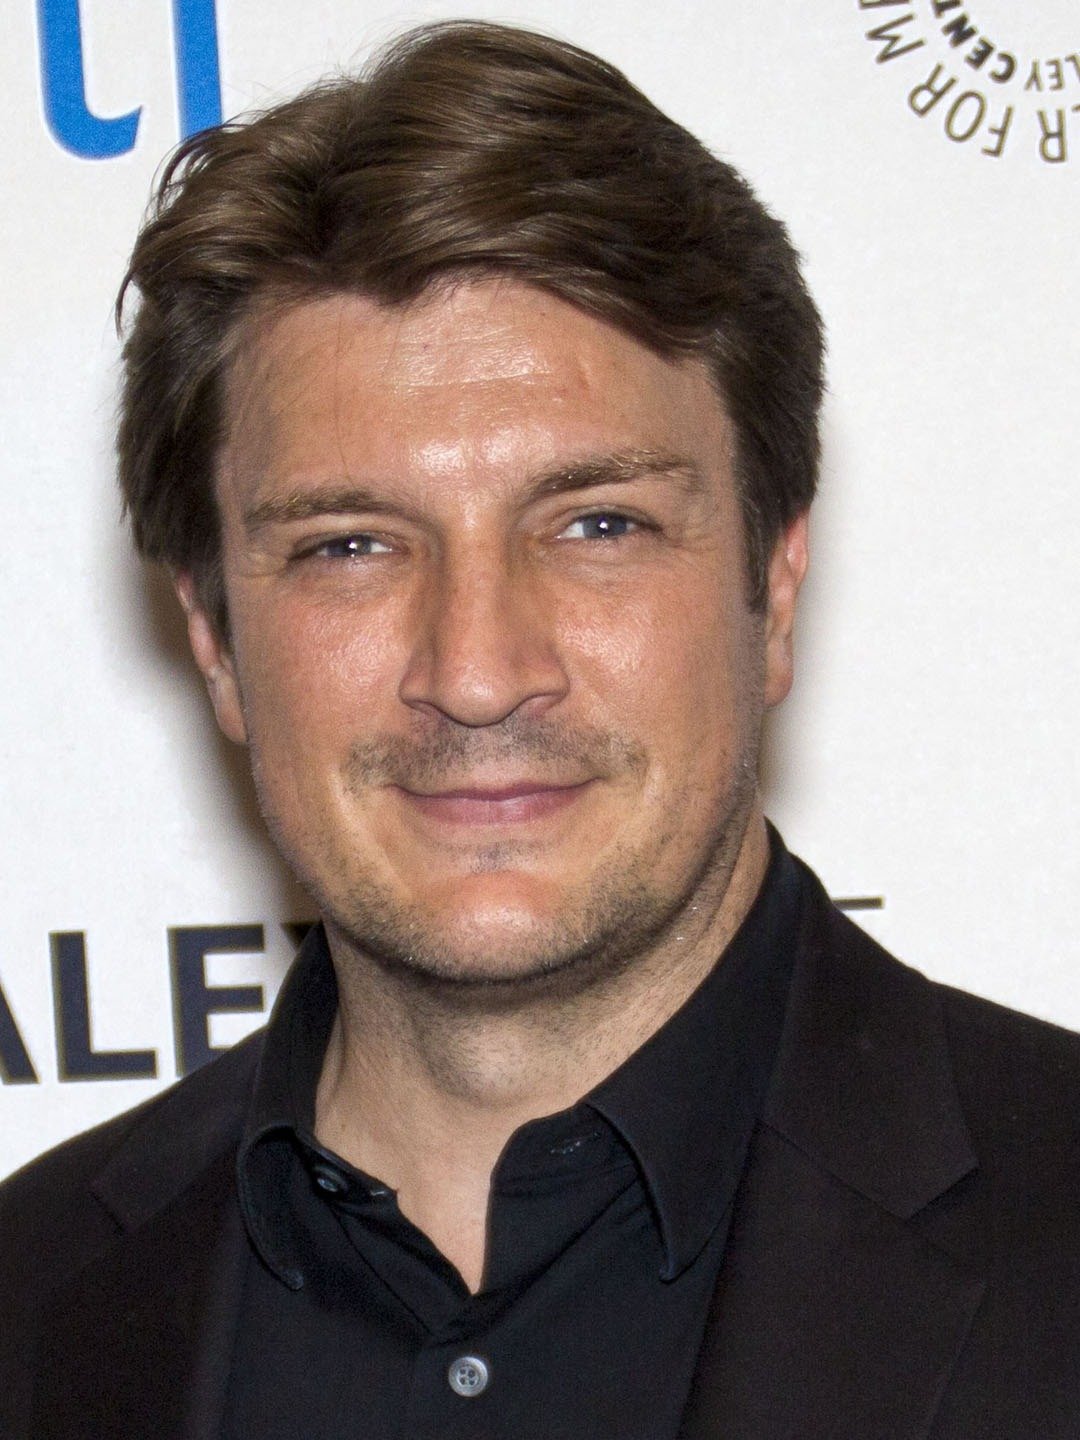 Nathan Fillion | The Rookie Wiki | FANDOM powered by Wikia